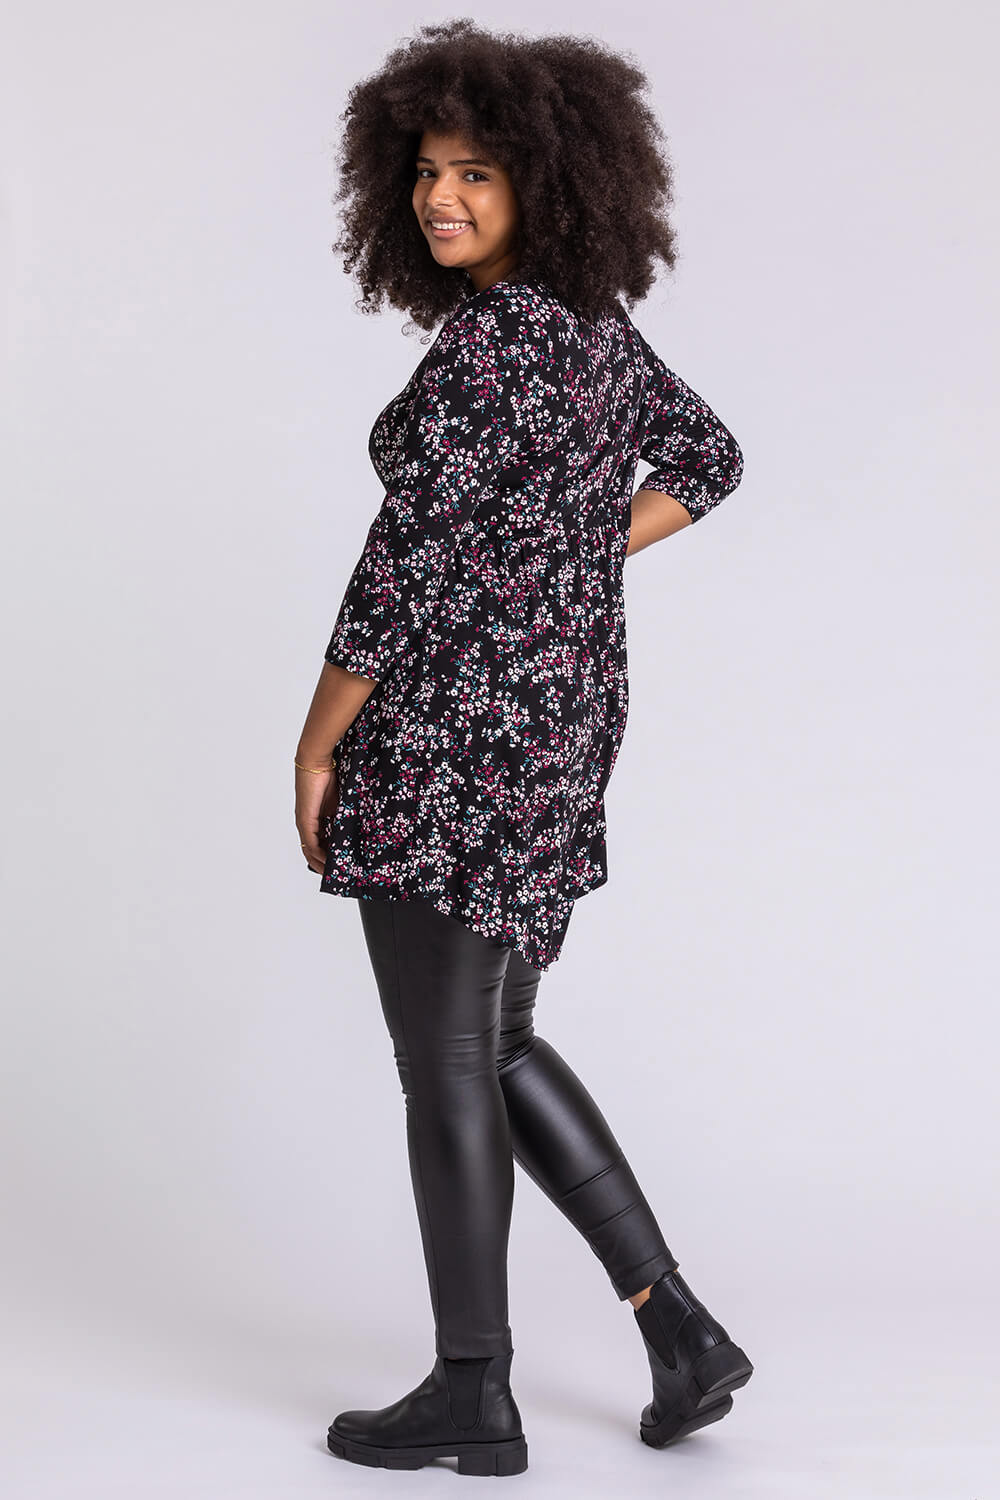 Plum Curve Floral Cross Detail Tunic Top, Image 2 of 4